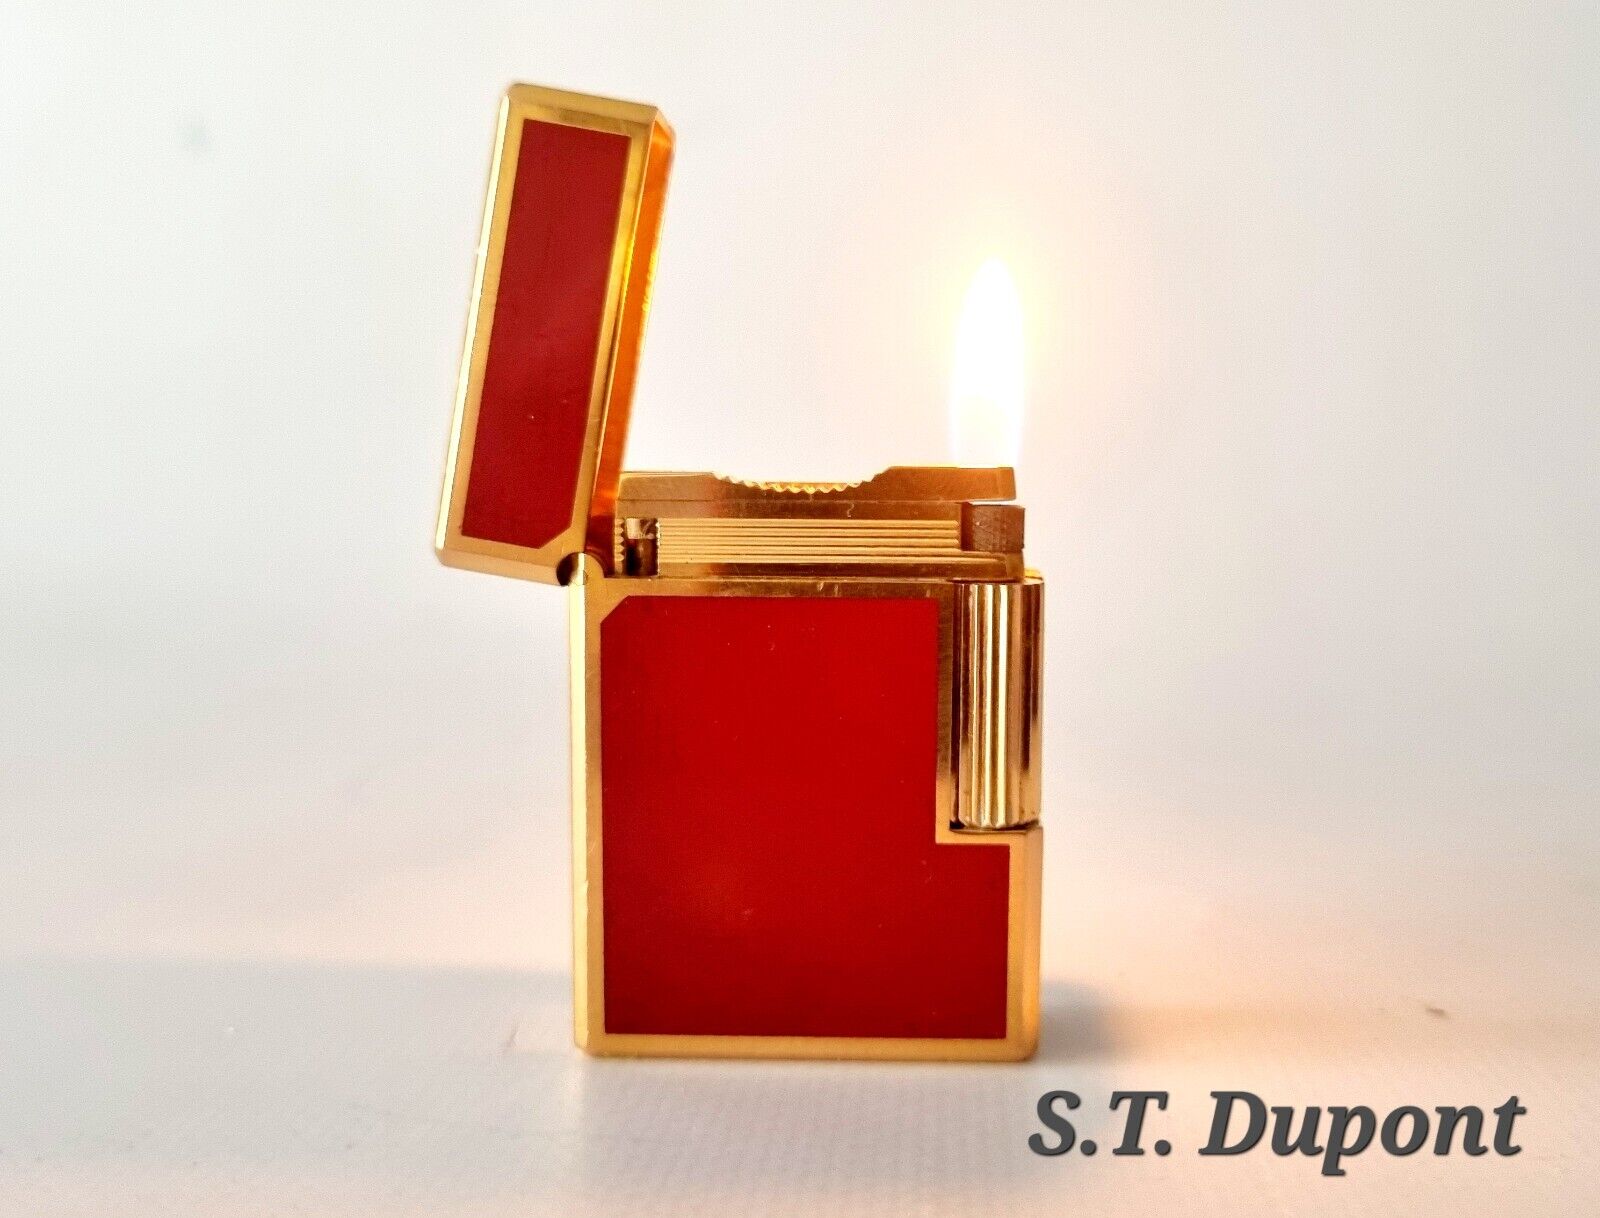 S.T. Dupont Lighter Line 1 Laque de Chine Gold Plated Vintage Working RARE